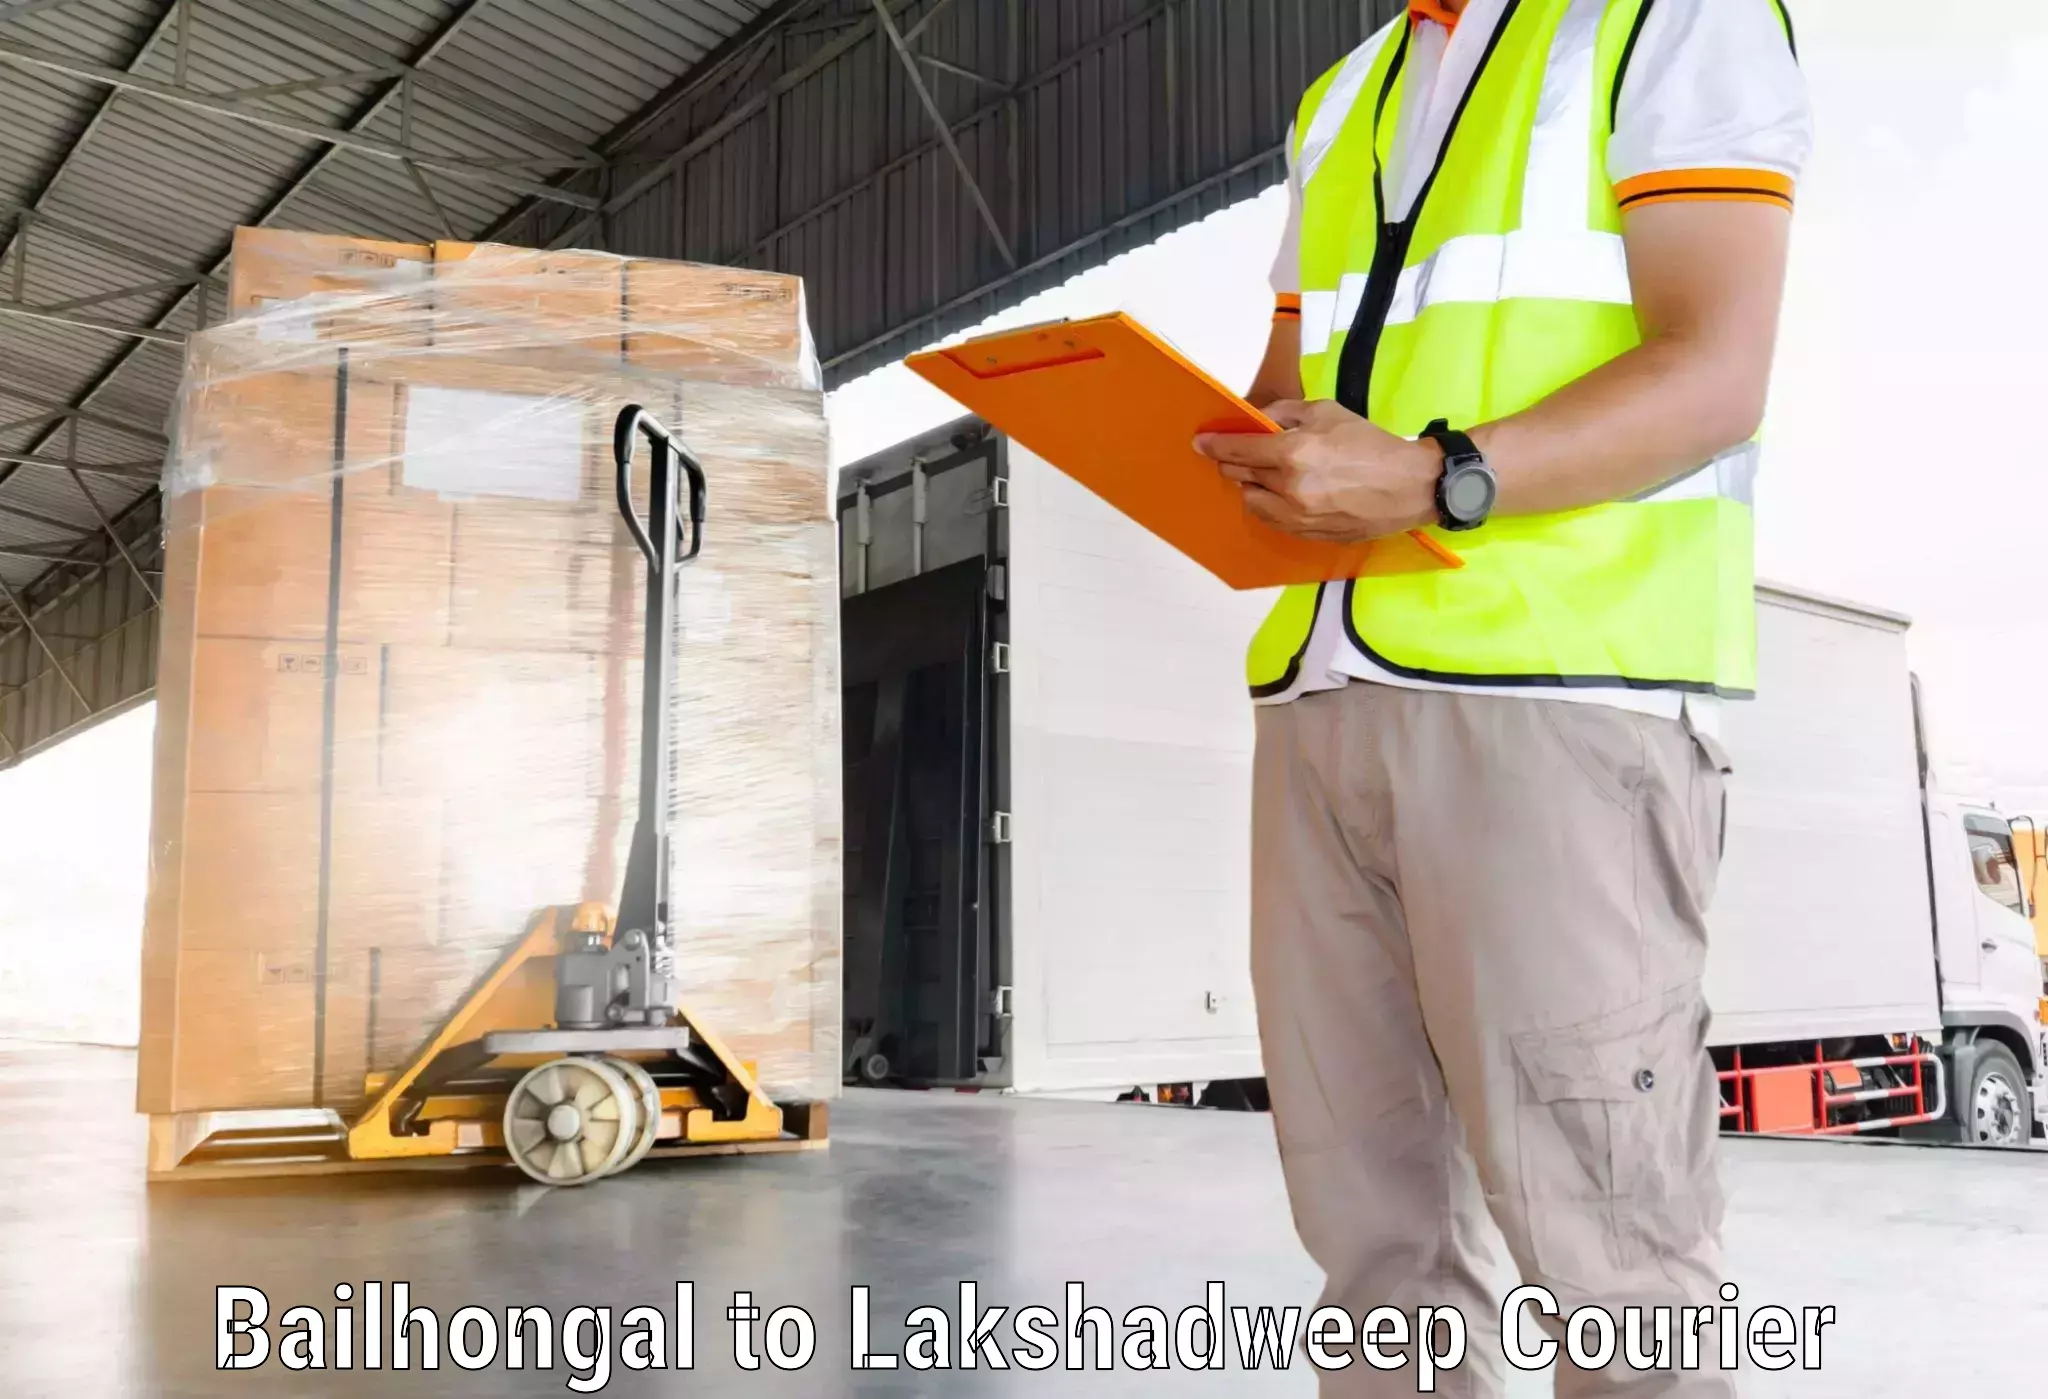 Global courier networks Bailhongal to Lakshadweep